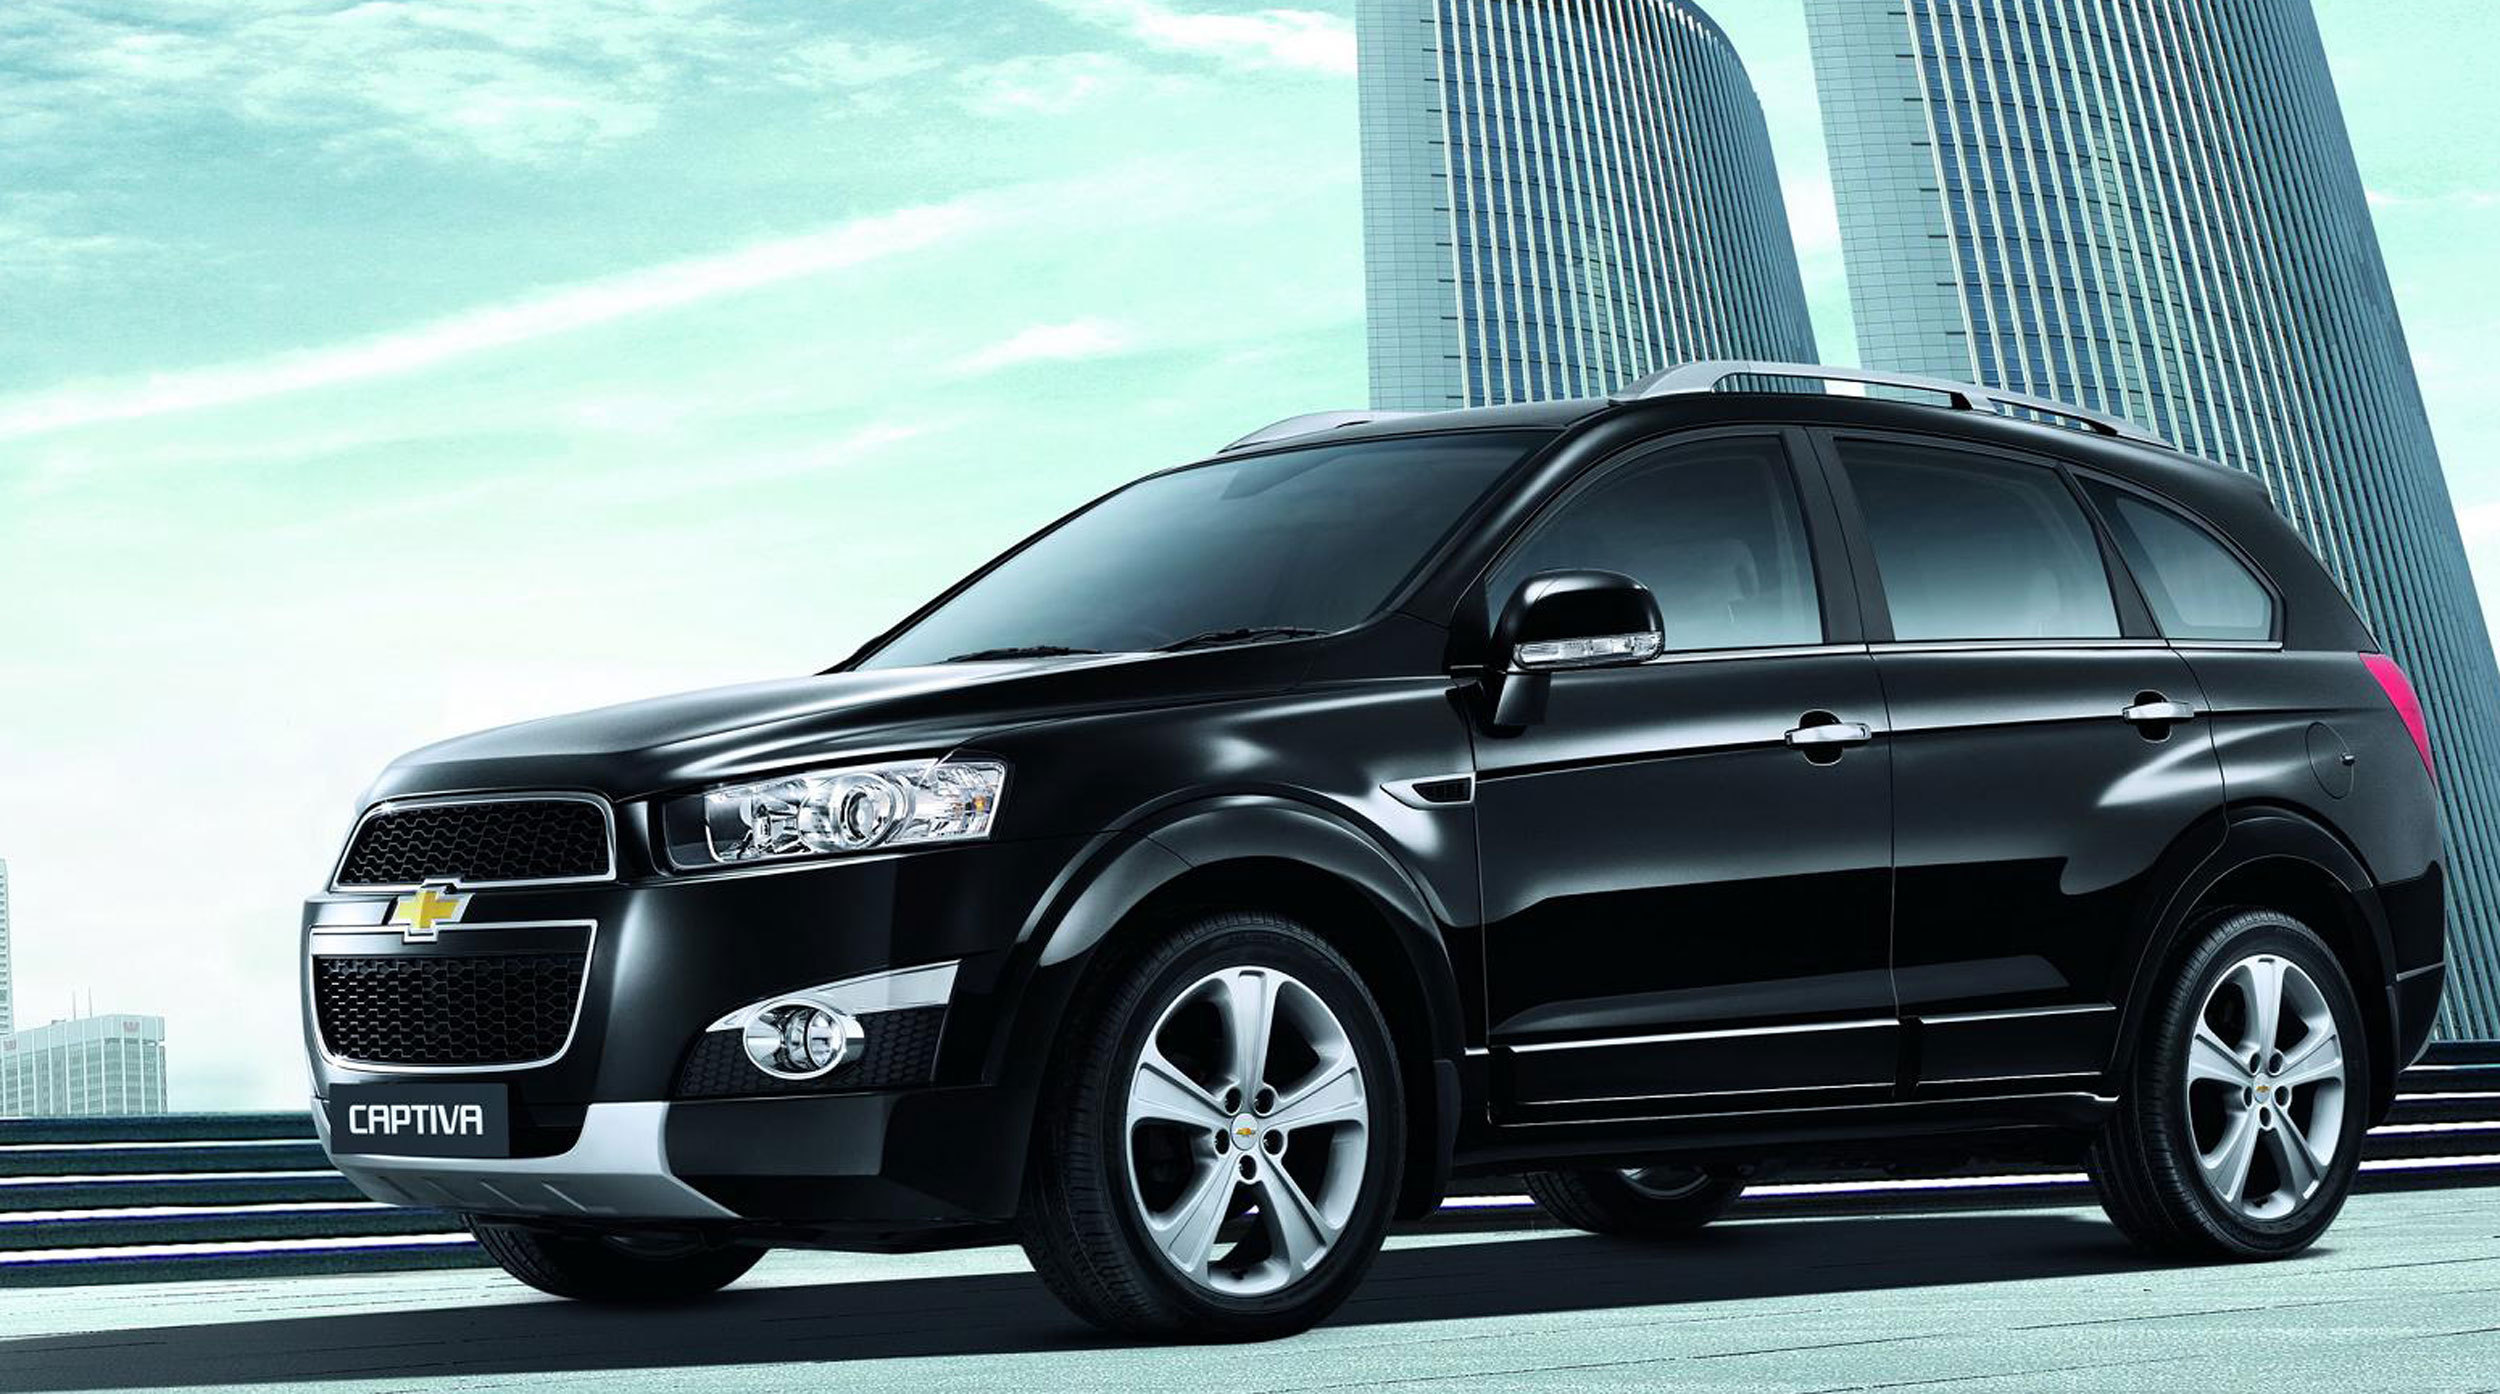 Car brand Chevrolet Captiva 2014 model wallpapers and images ...